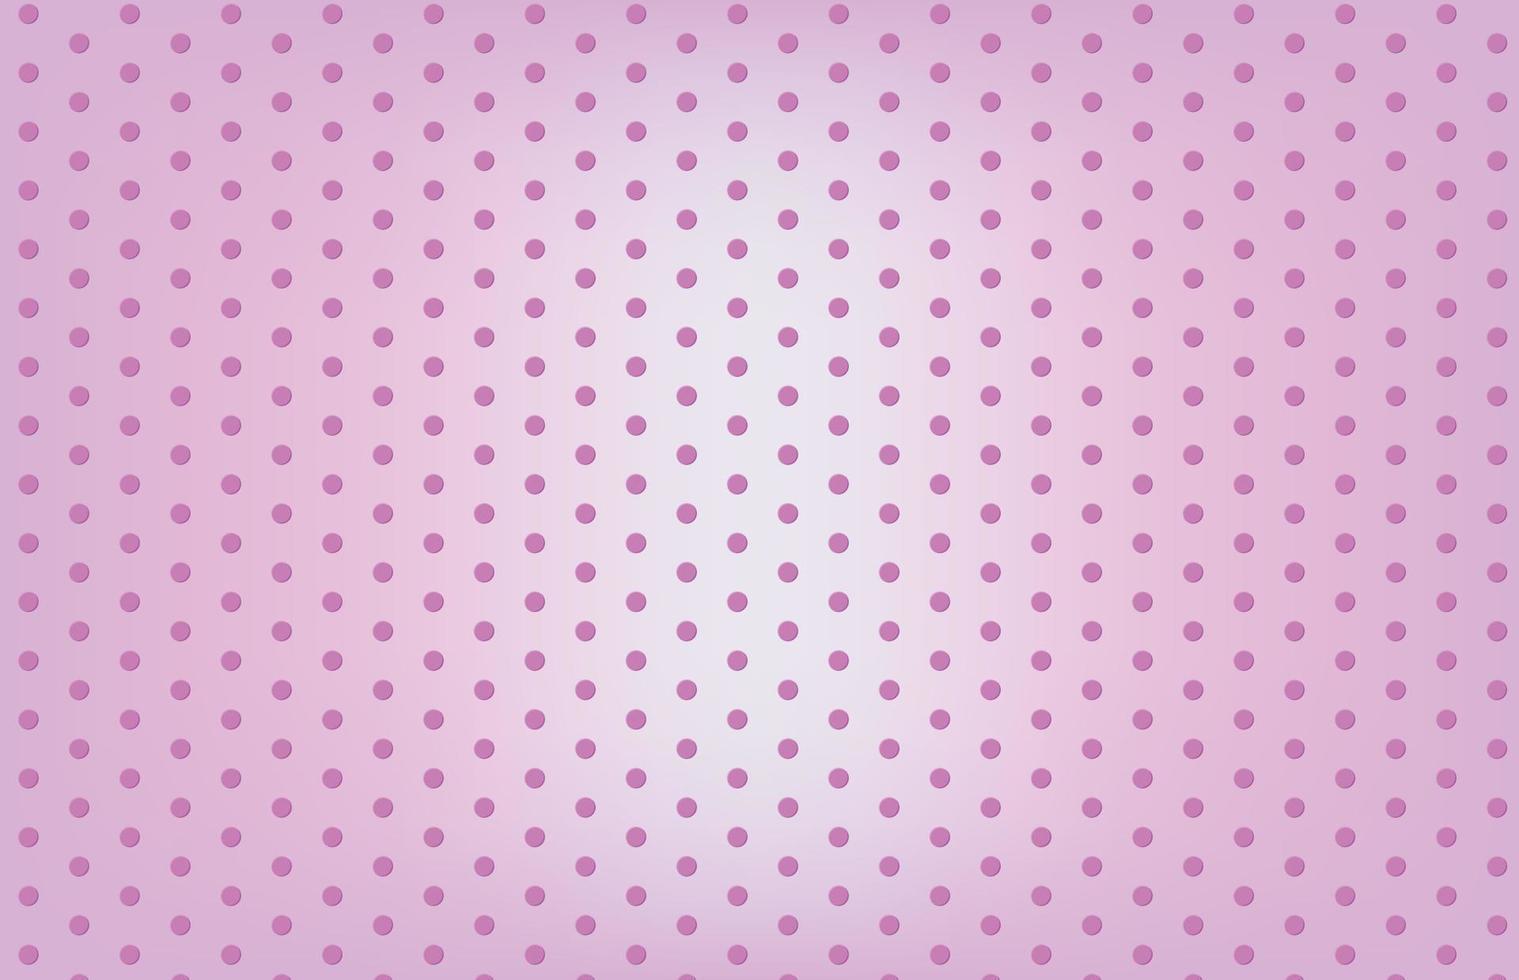 abstract background of sweet pink polka dot pattern vector